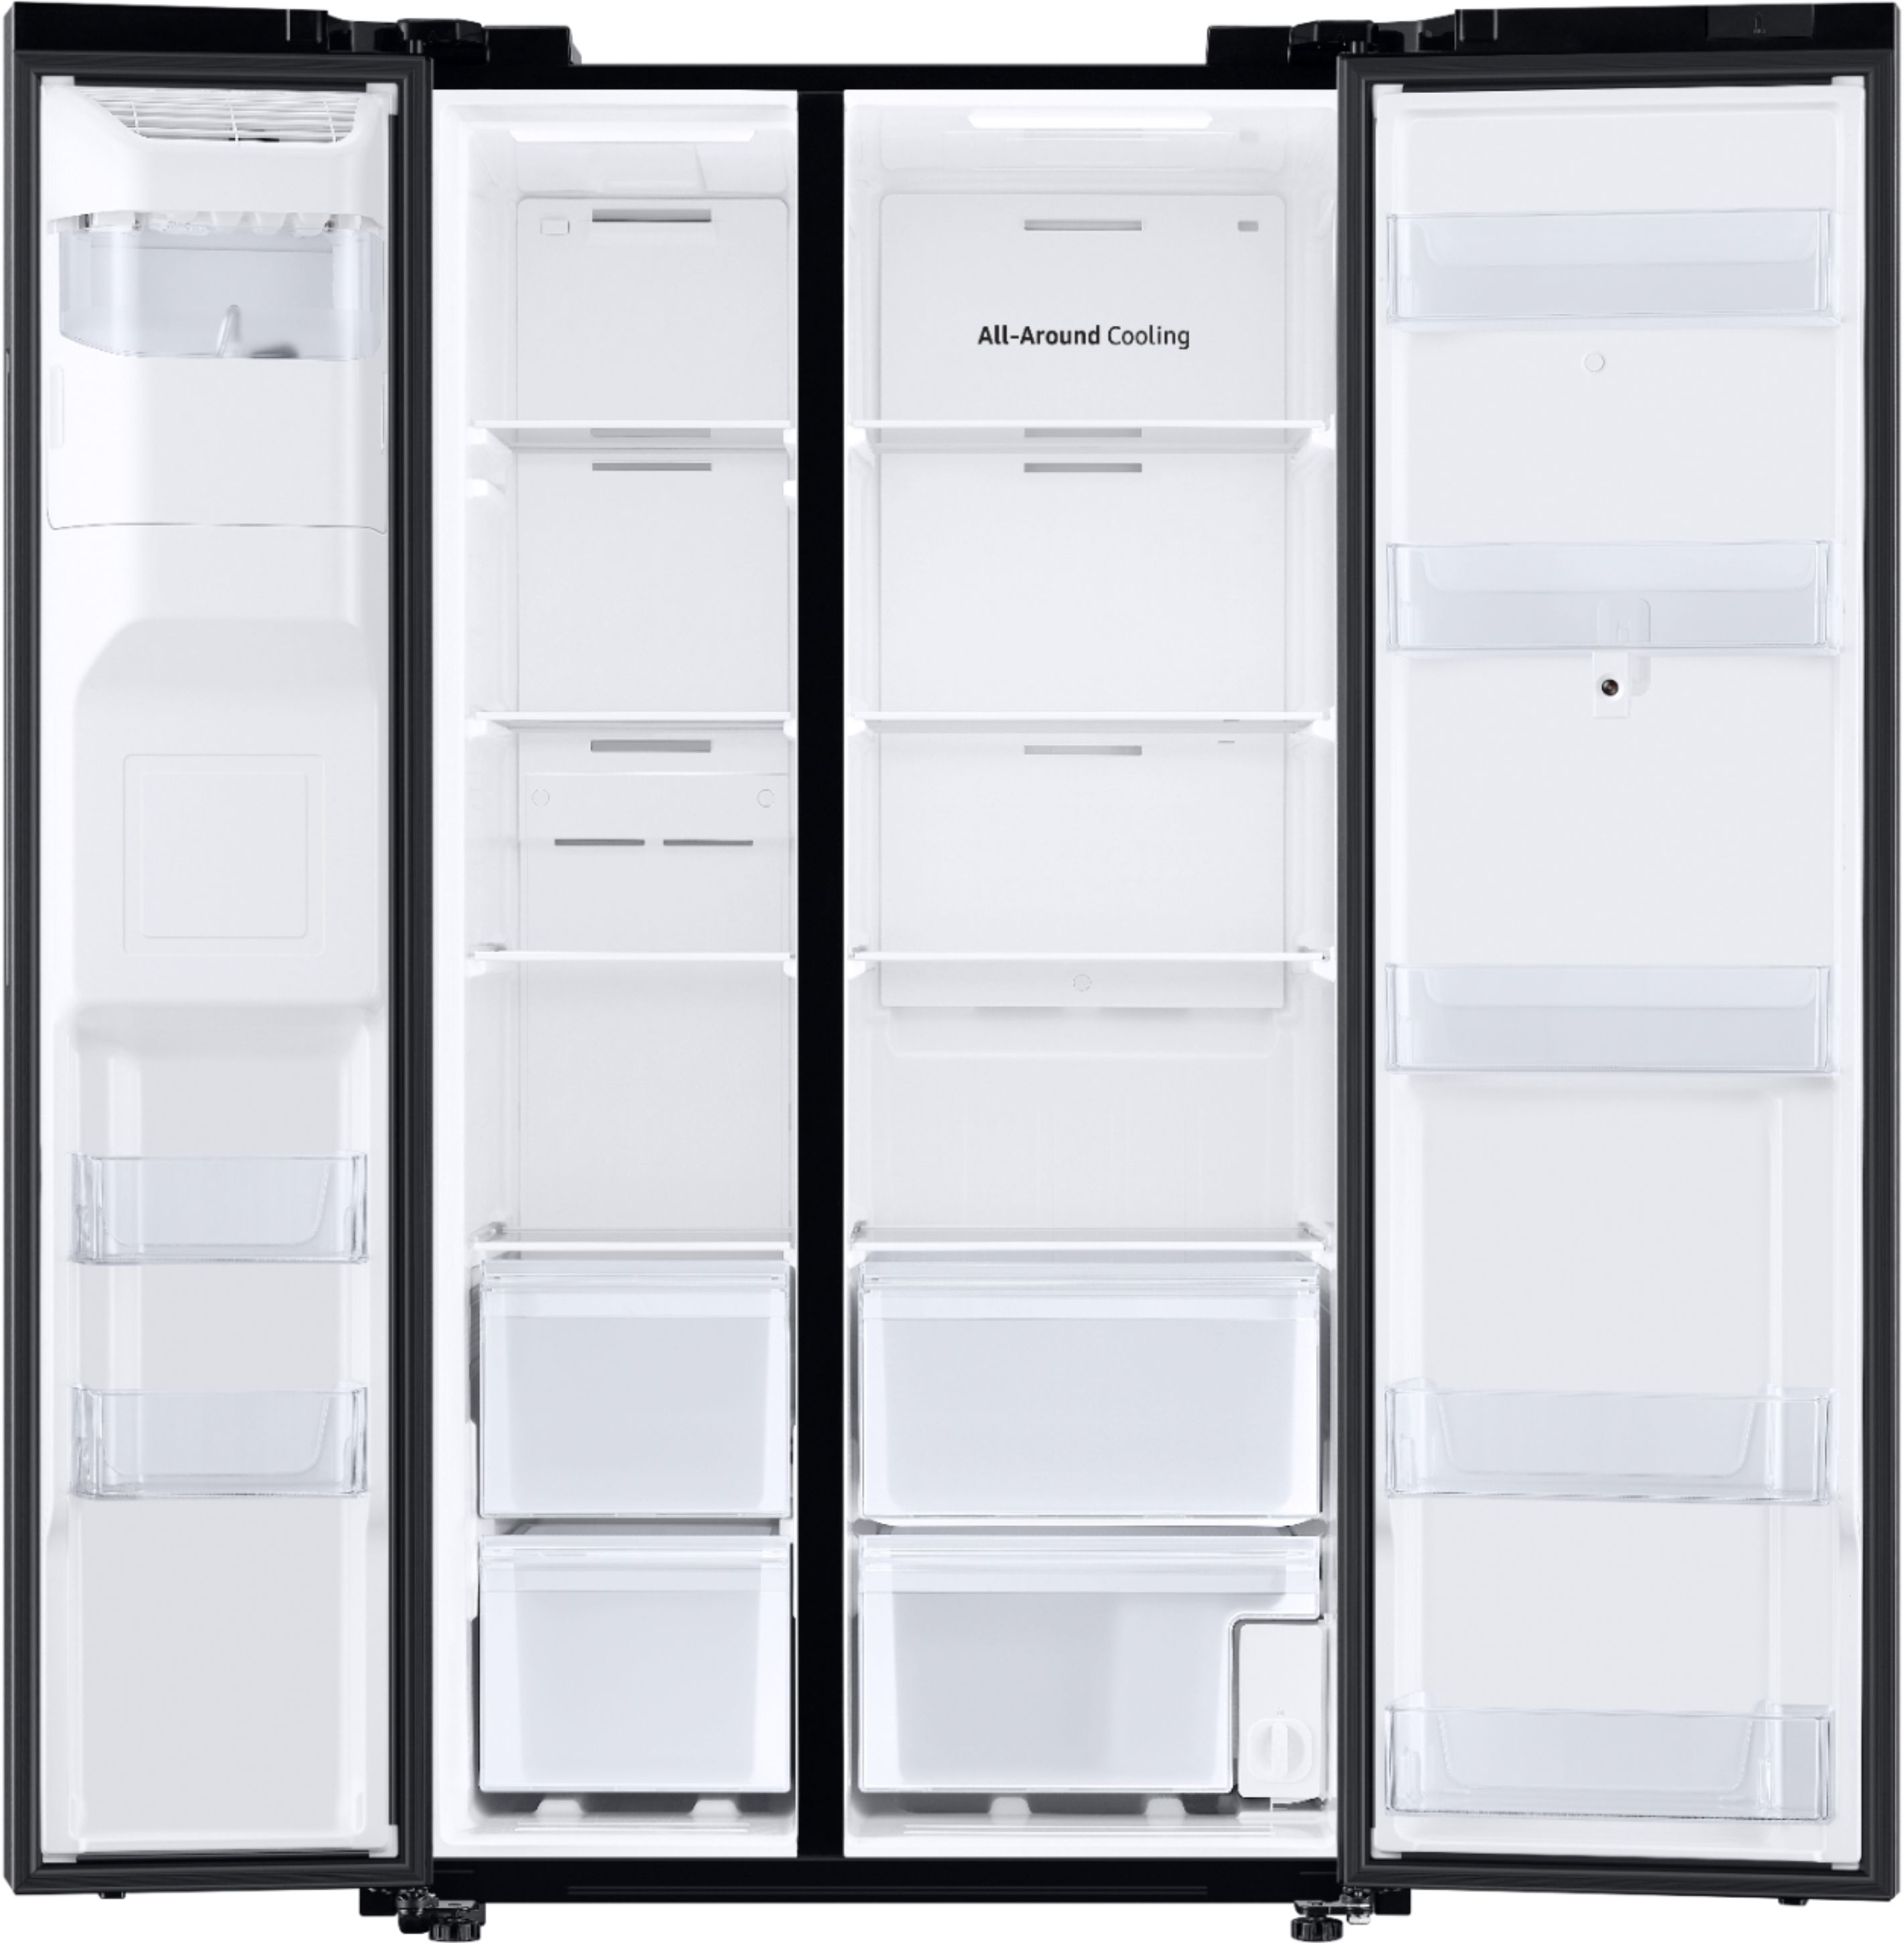 Samsung 26.7 cu. ft. Family Hub Side by Side Smart Refrigerator in